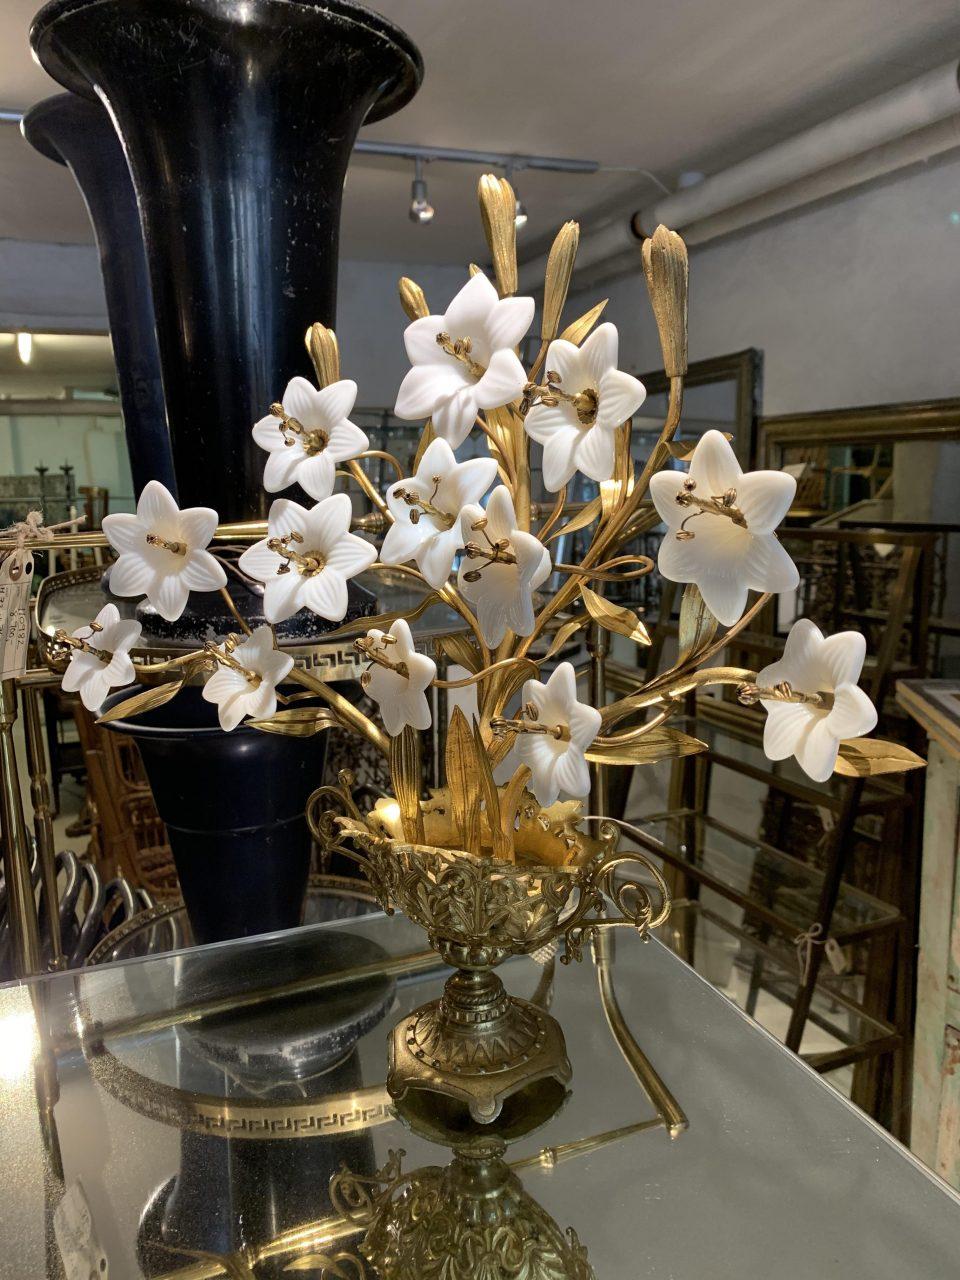 A truly seldom seen and utterly gorgeous antique French church ornament, without the usual candle arms / holder, but instead with countless charming small white opaque glass flowers. This particular kind of candelabra relates to those originating